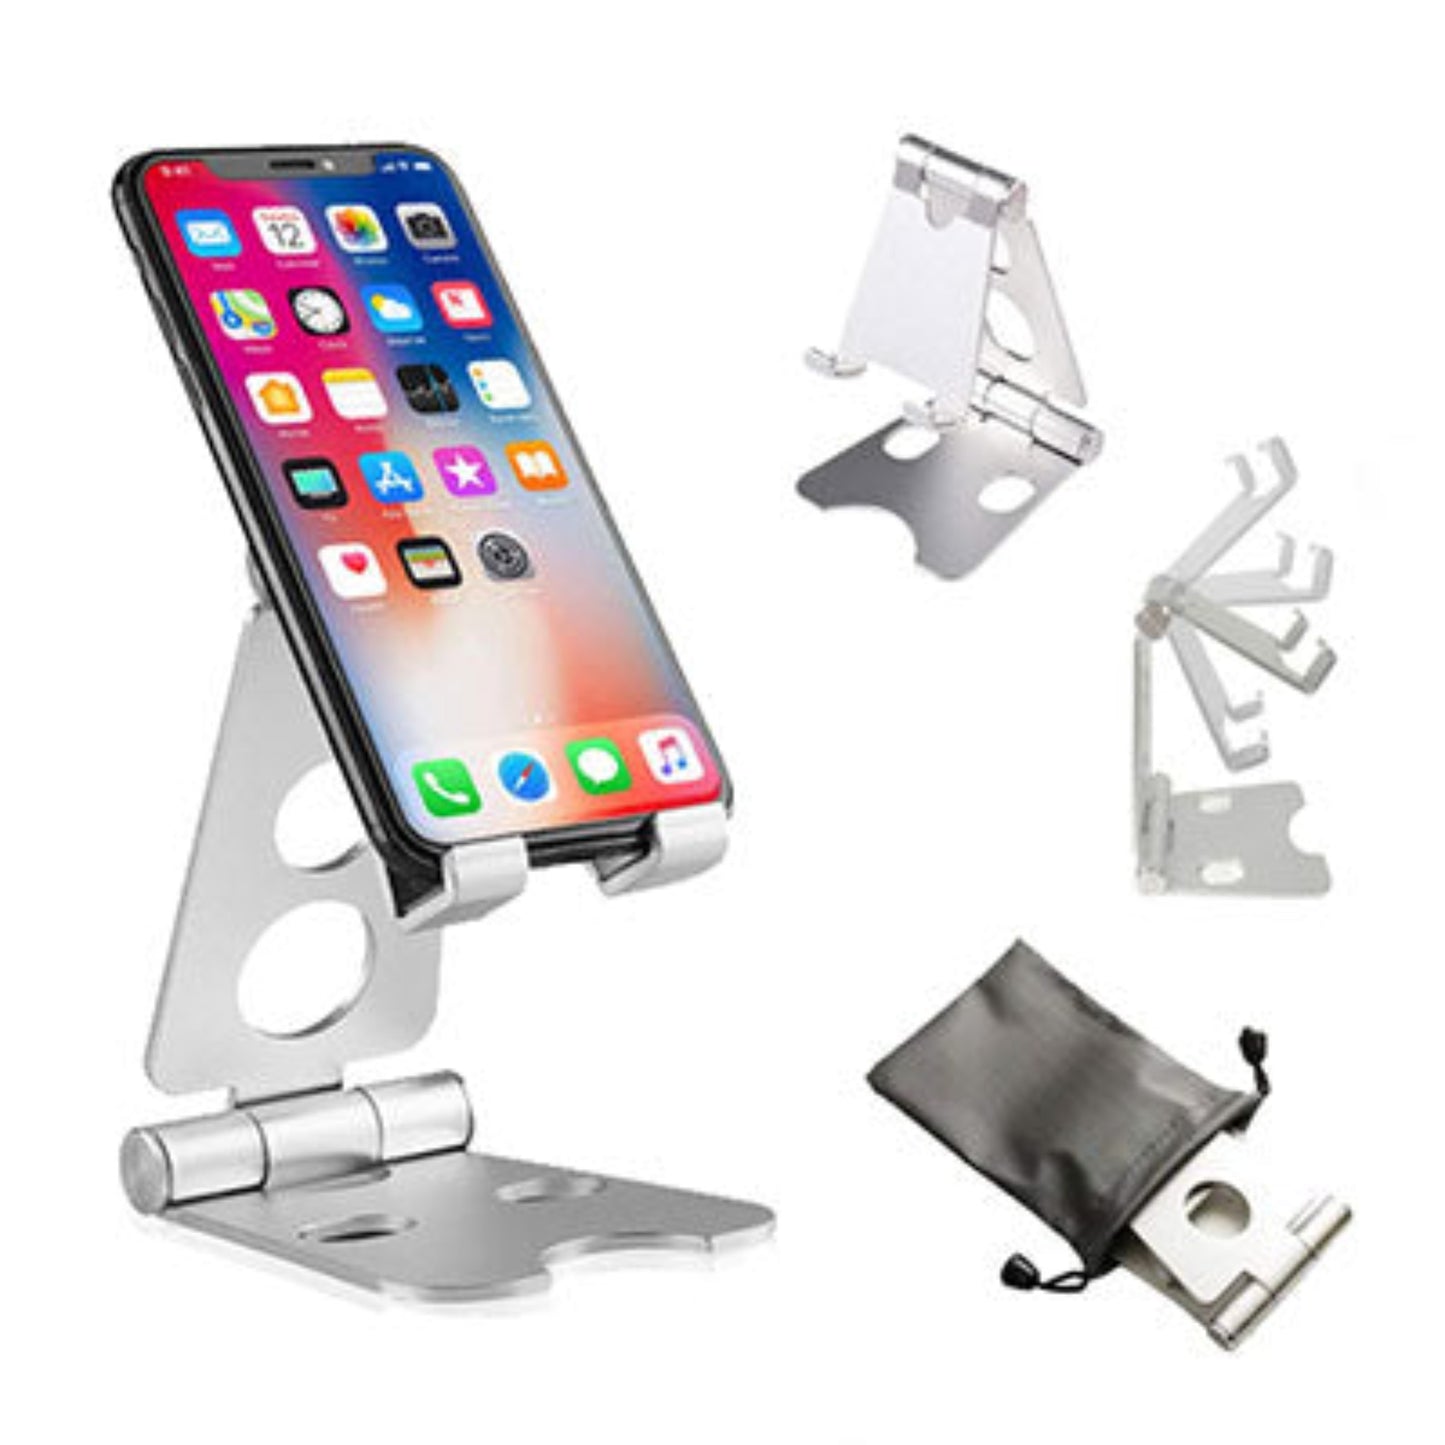 Portable Cell Phone/Tablet Holder